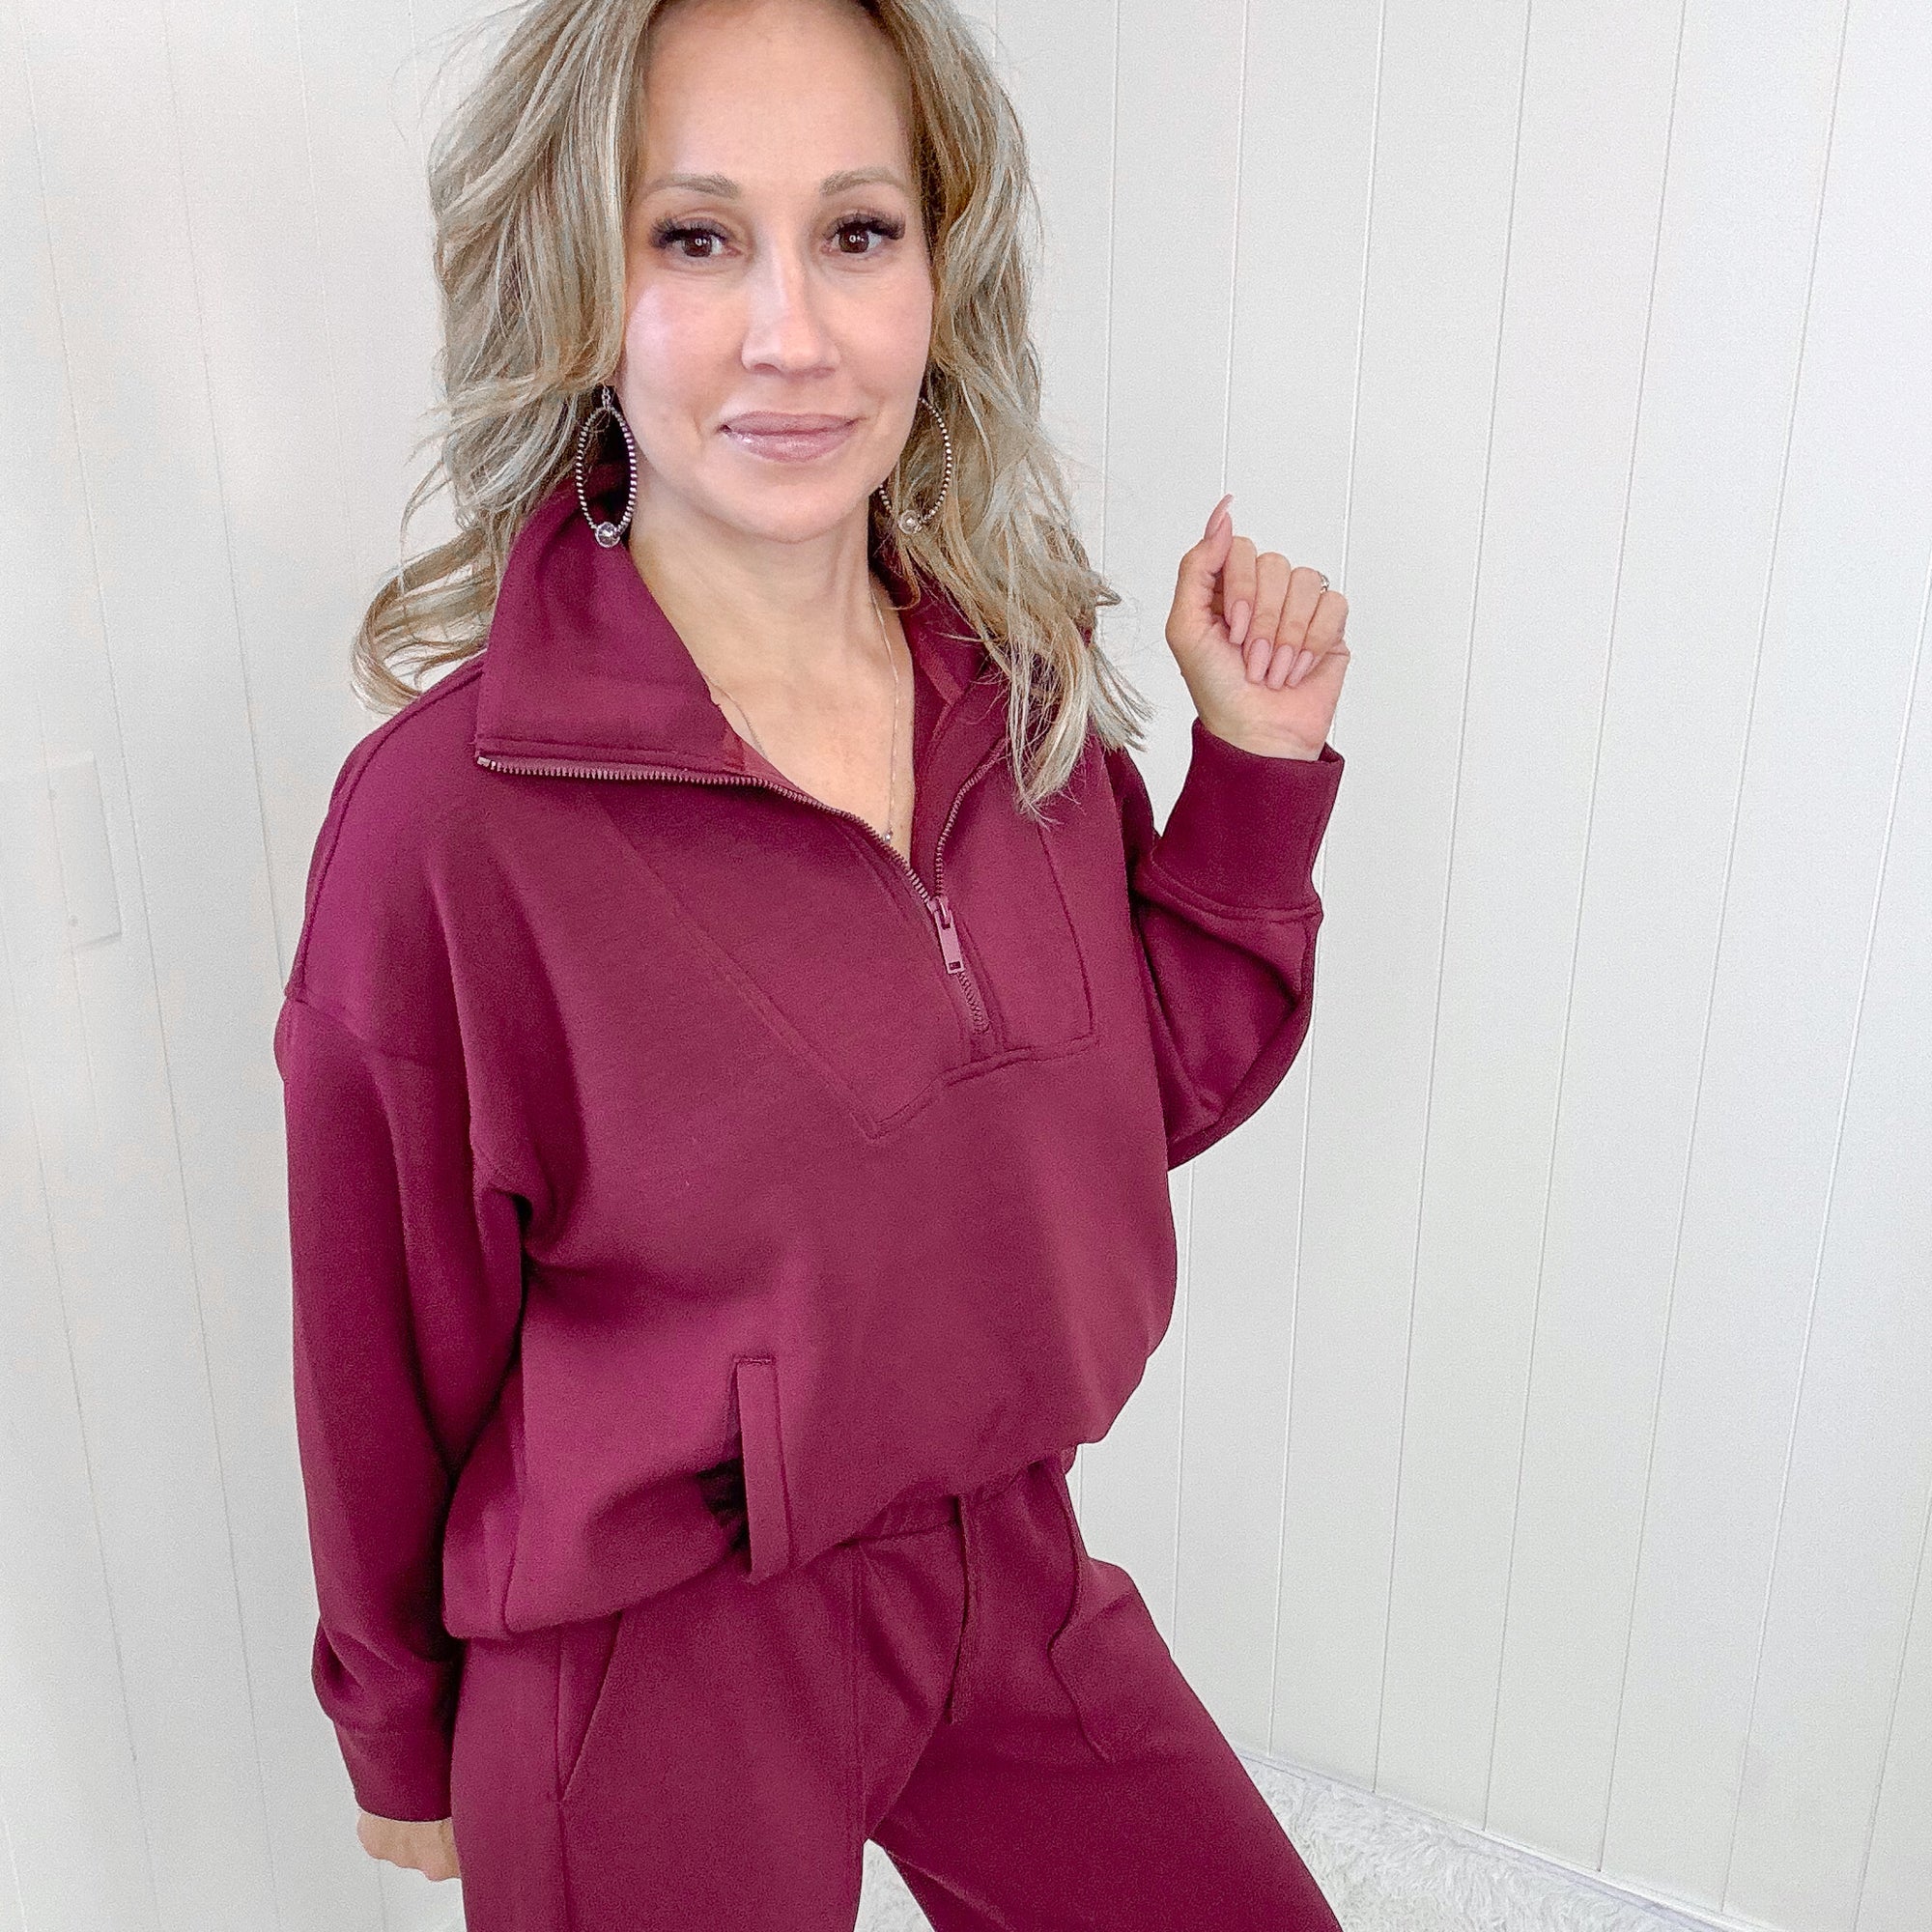 Burgundy Micro Modal Knit Handle Half Zip Pullover Top - Boujee Boutique 